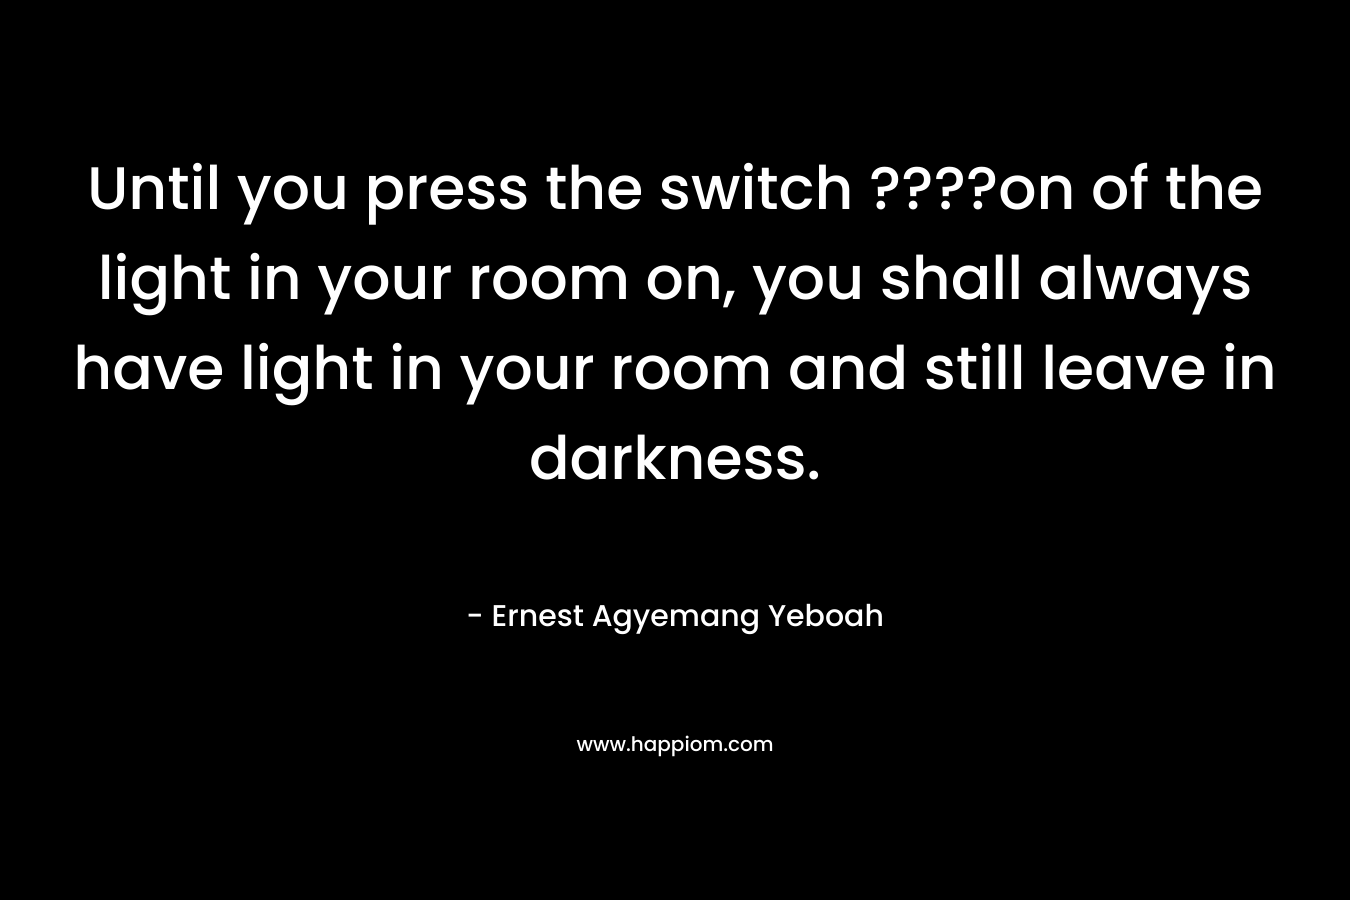 Until you press the switch ????on of the light in your room on, you shall always have light in your room and still leave in darkness.